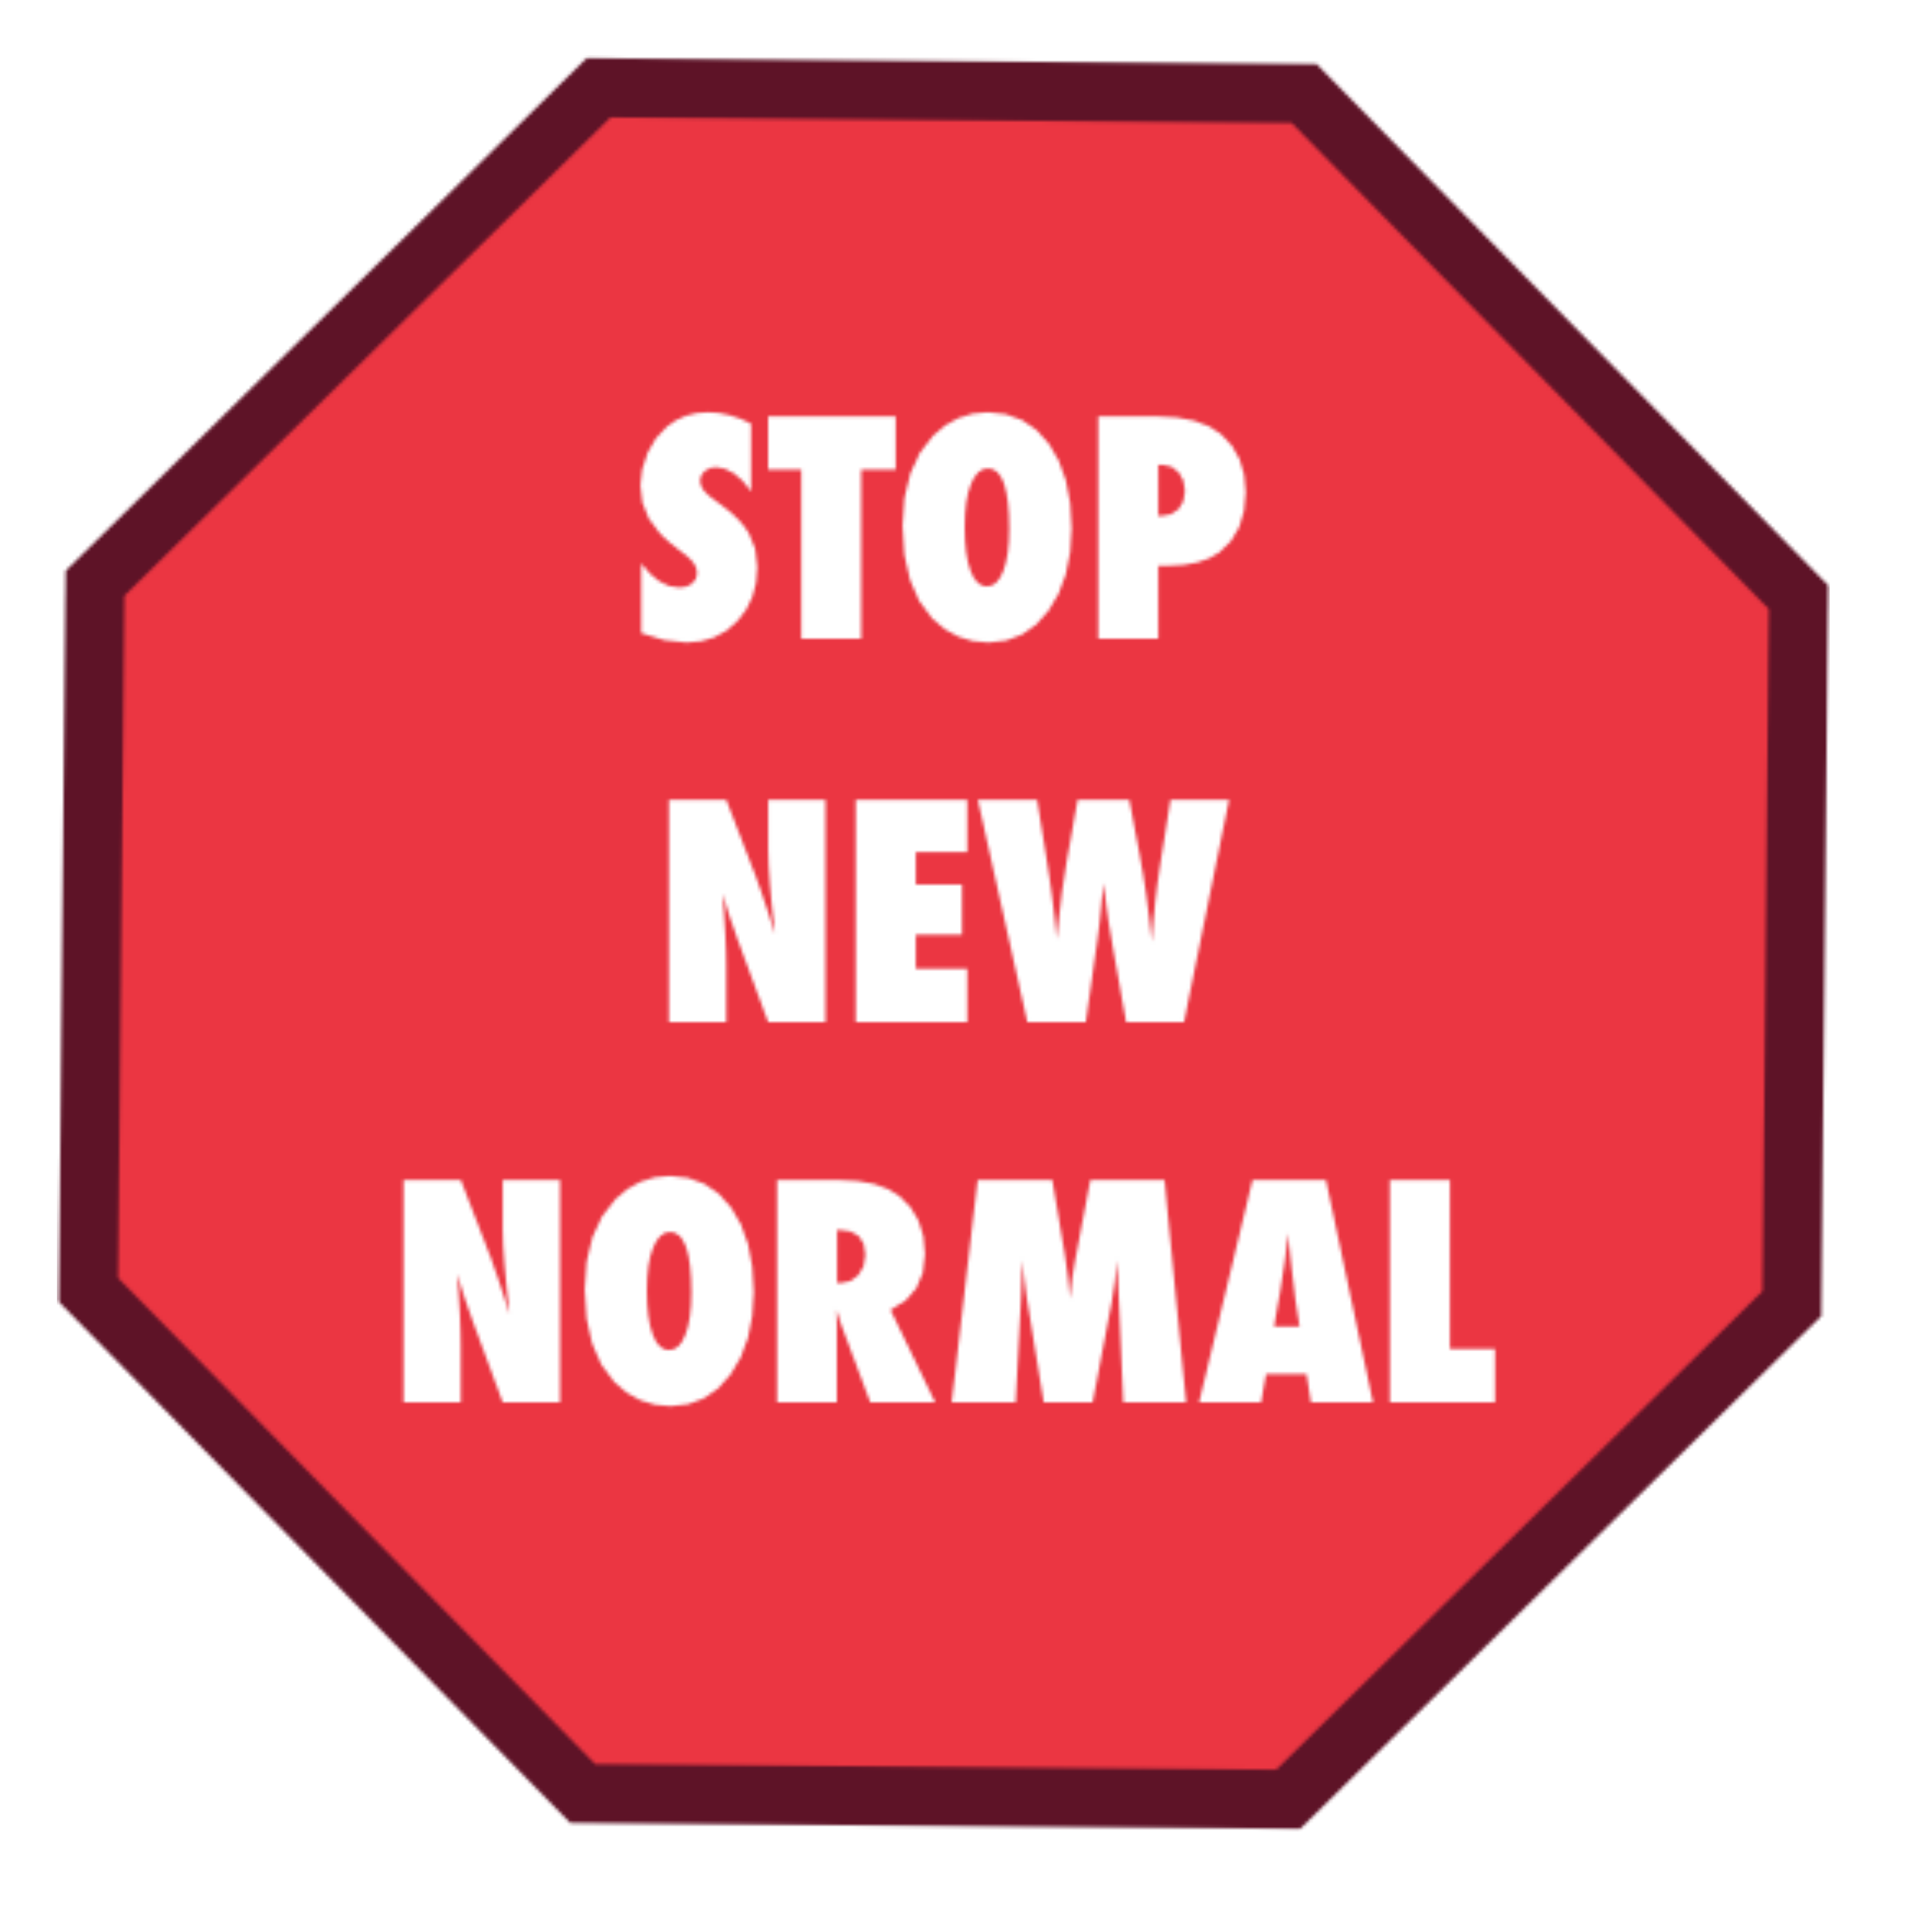 Stop_new_normal (1)